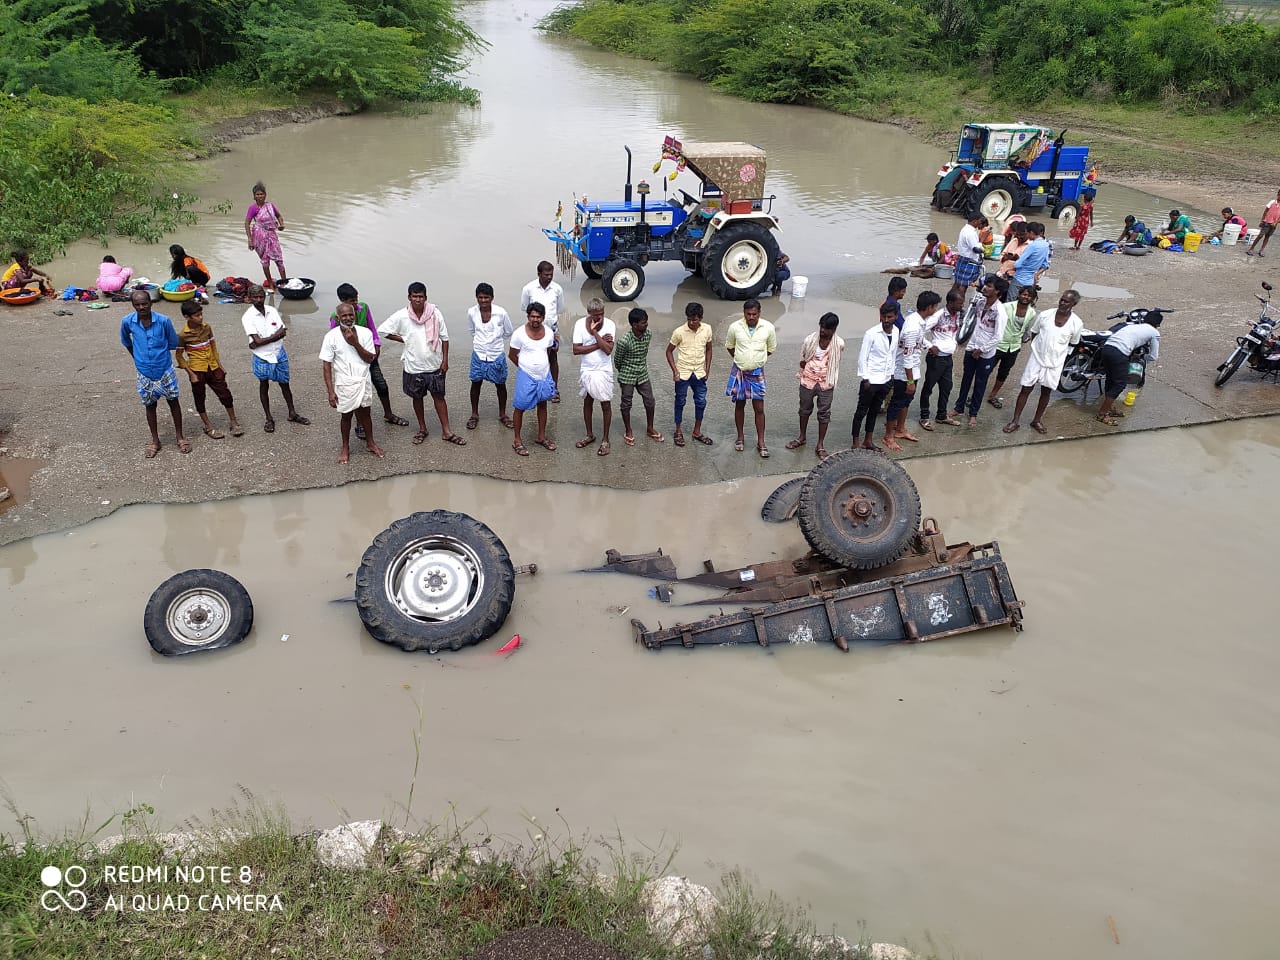 A tractor that rolled over into a stream